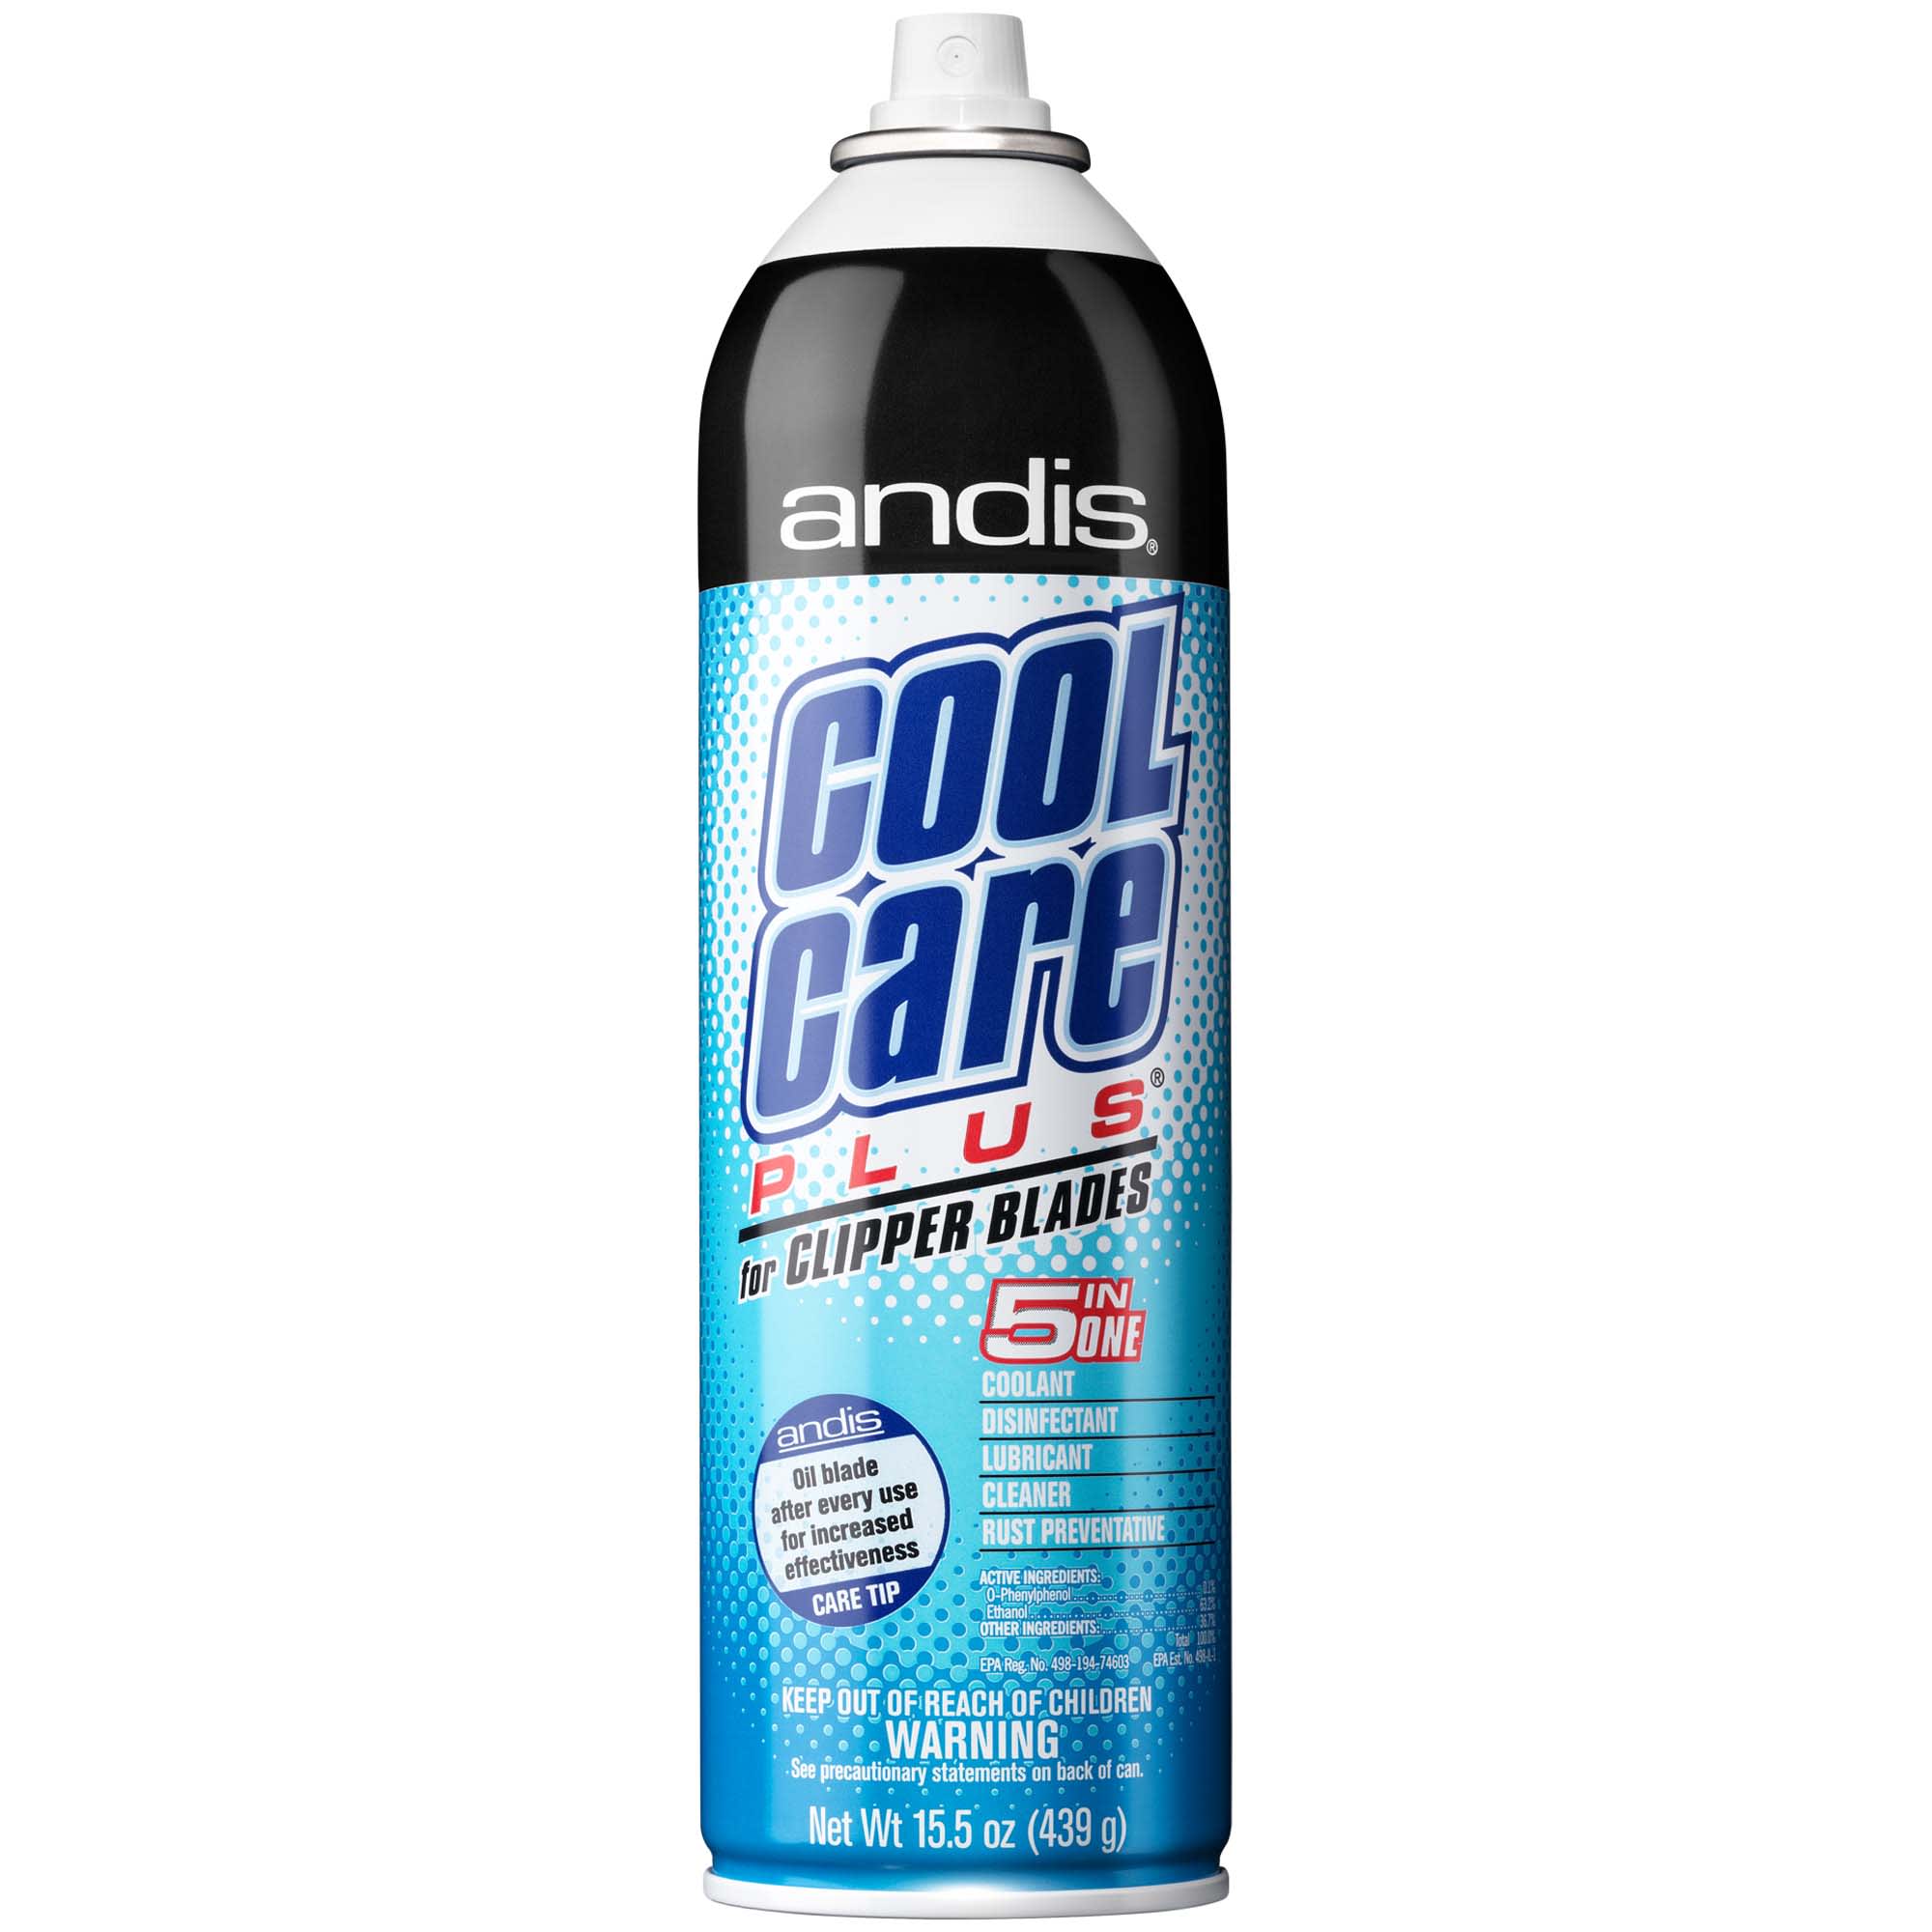 Andis CLIPPER BLADE COOL CARE PLUS SPRAY&WASH&OIL&BRUSH SET Cleaner,Coolant,Lube